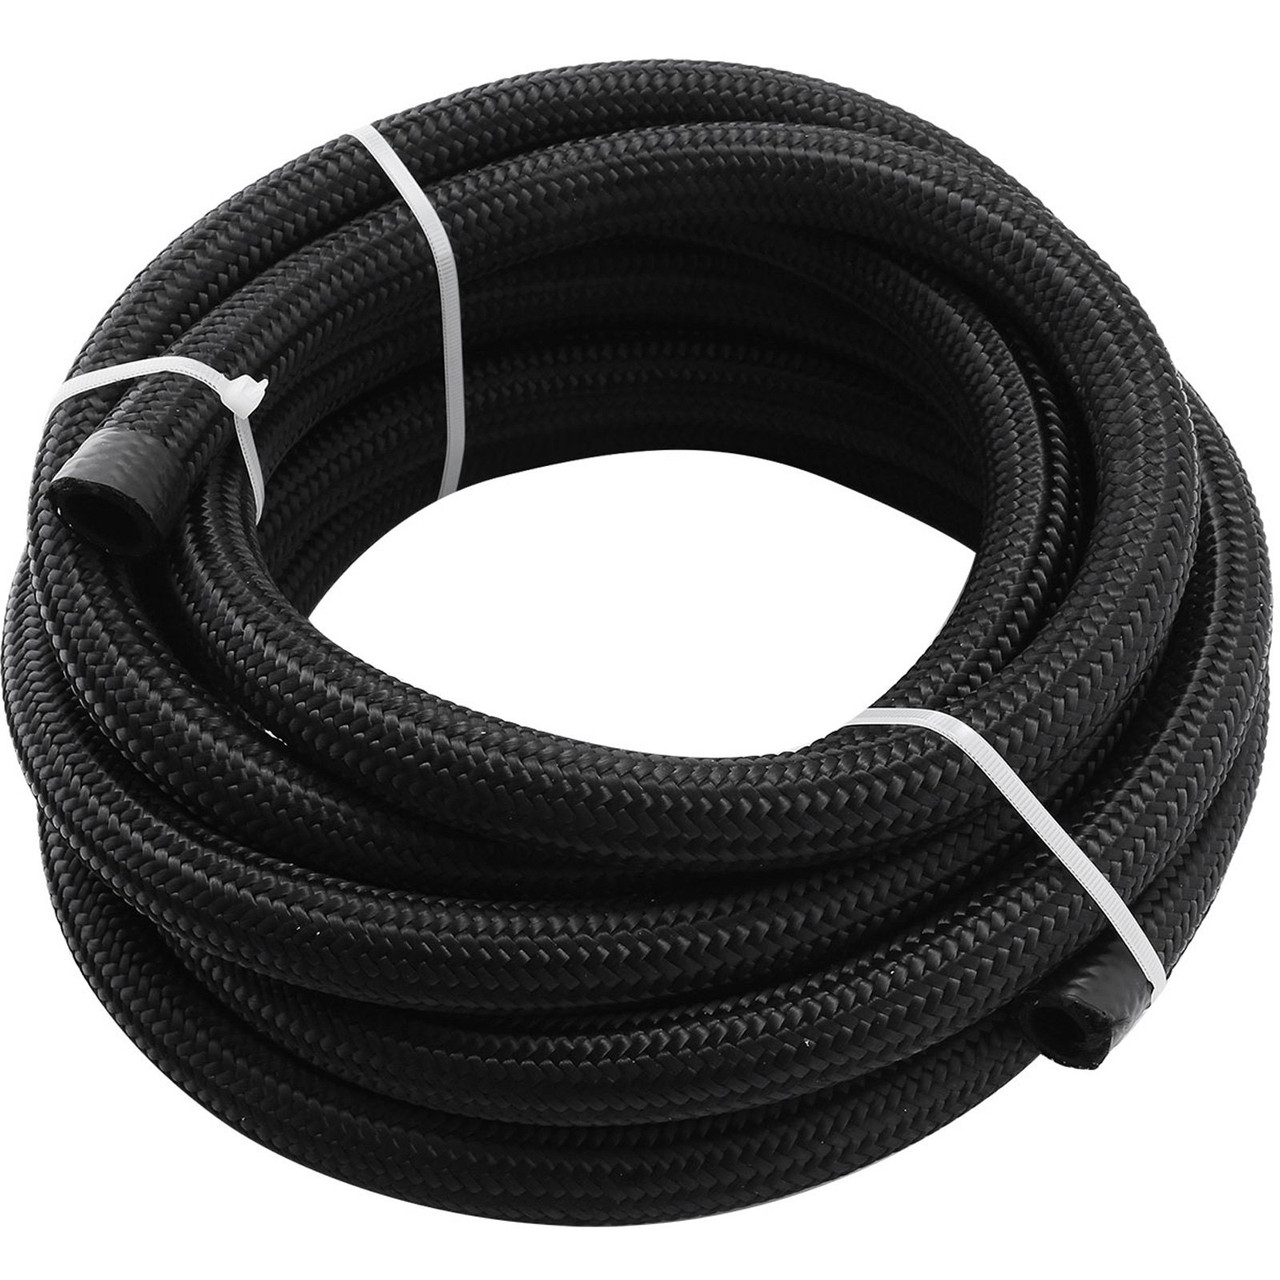 AN10 Fitting Stainless Steel Nylon Braided Oil Fuel Hose Line Kit